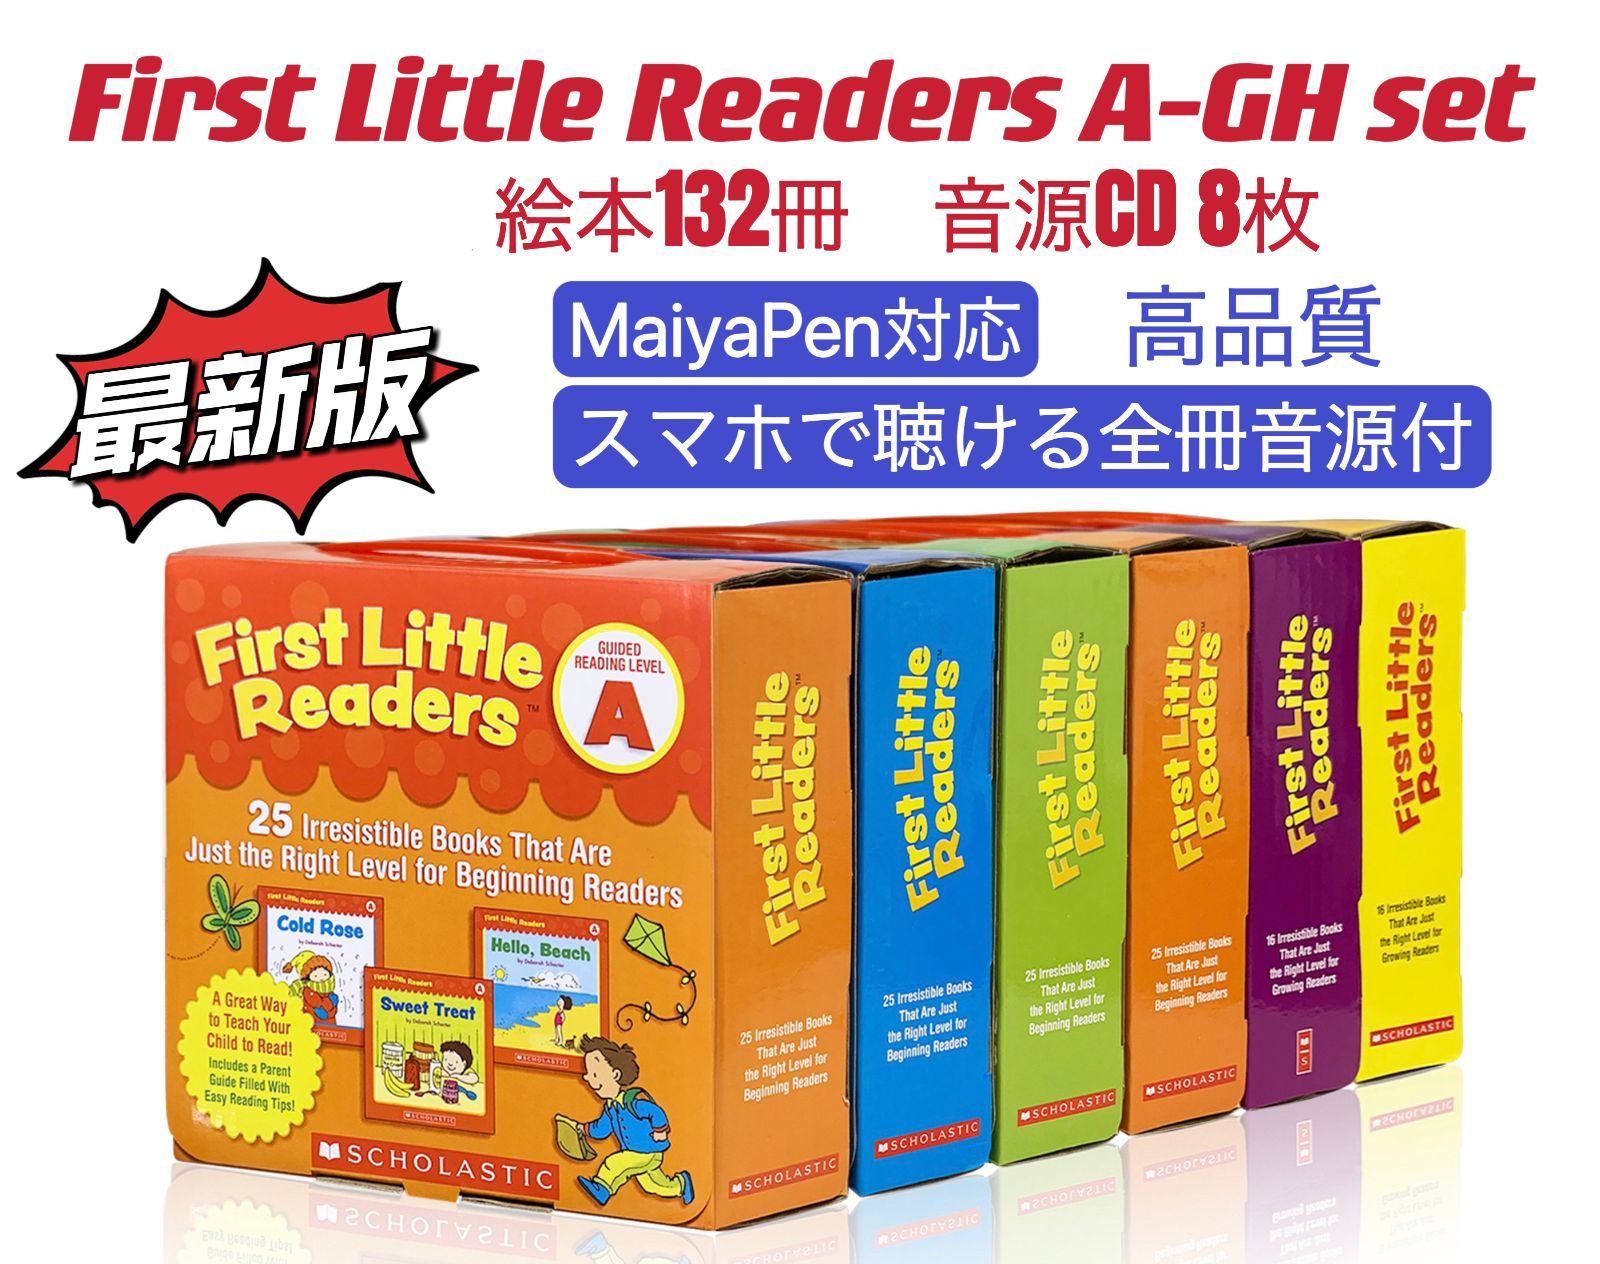 first little readers等3点英語絵本 マイヤペン対応 多読洋書 - 絵本 